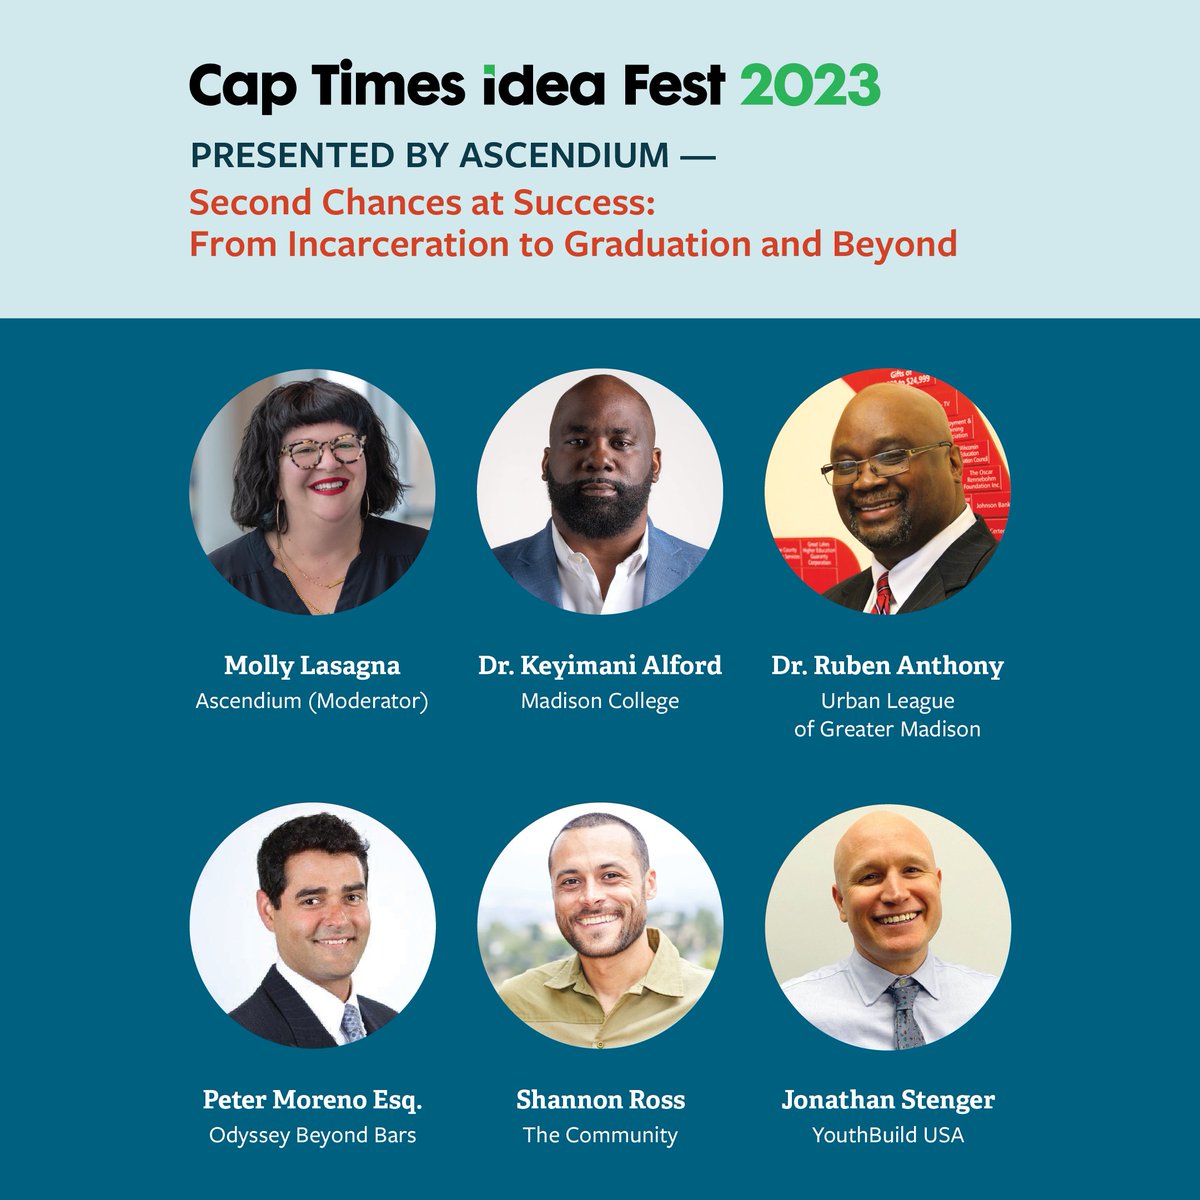 @ctideafest is coming soon! Grab your tickets and check out the session “Second Chances at Success: From Incarceration to Graduation and Beyond,” presented by #AscendiumEP, at 7 p.m. on Sept. 18. bit.ly/3RaEBFr

@CapTimes #CapTimesIdeaFest #HigherEdinPrison